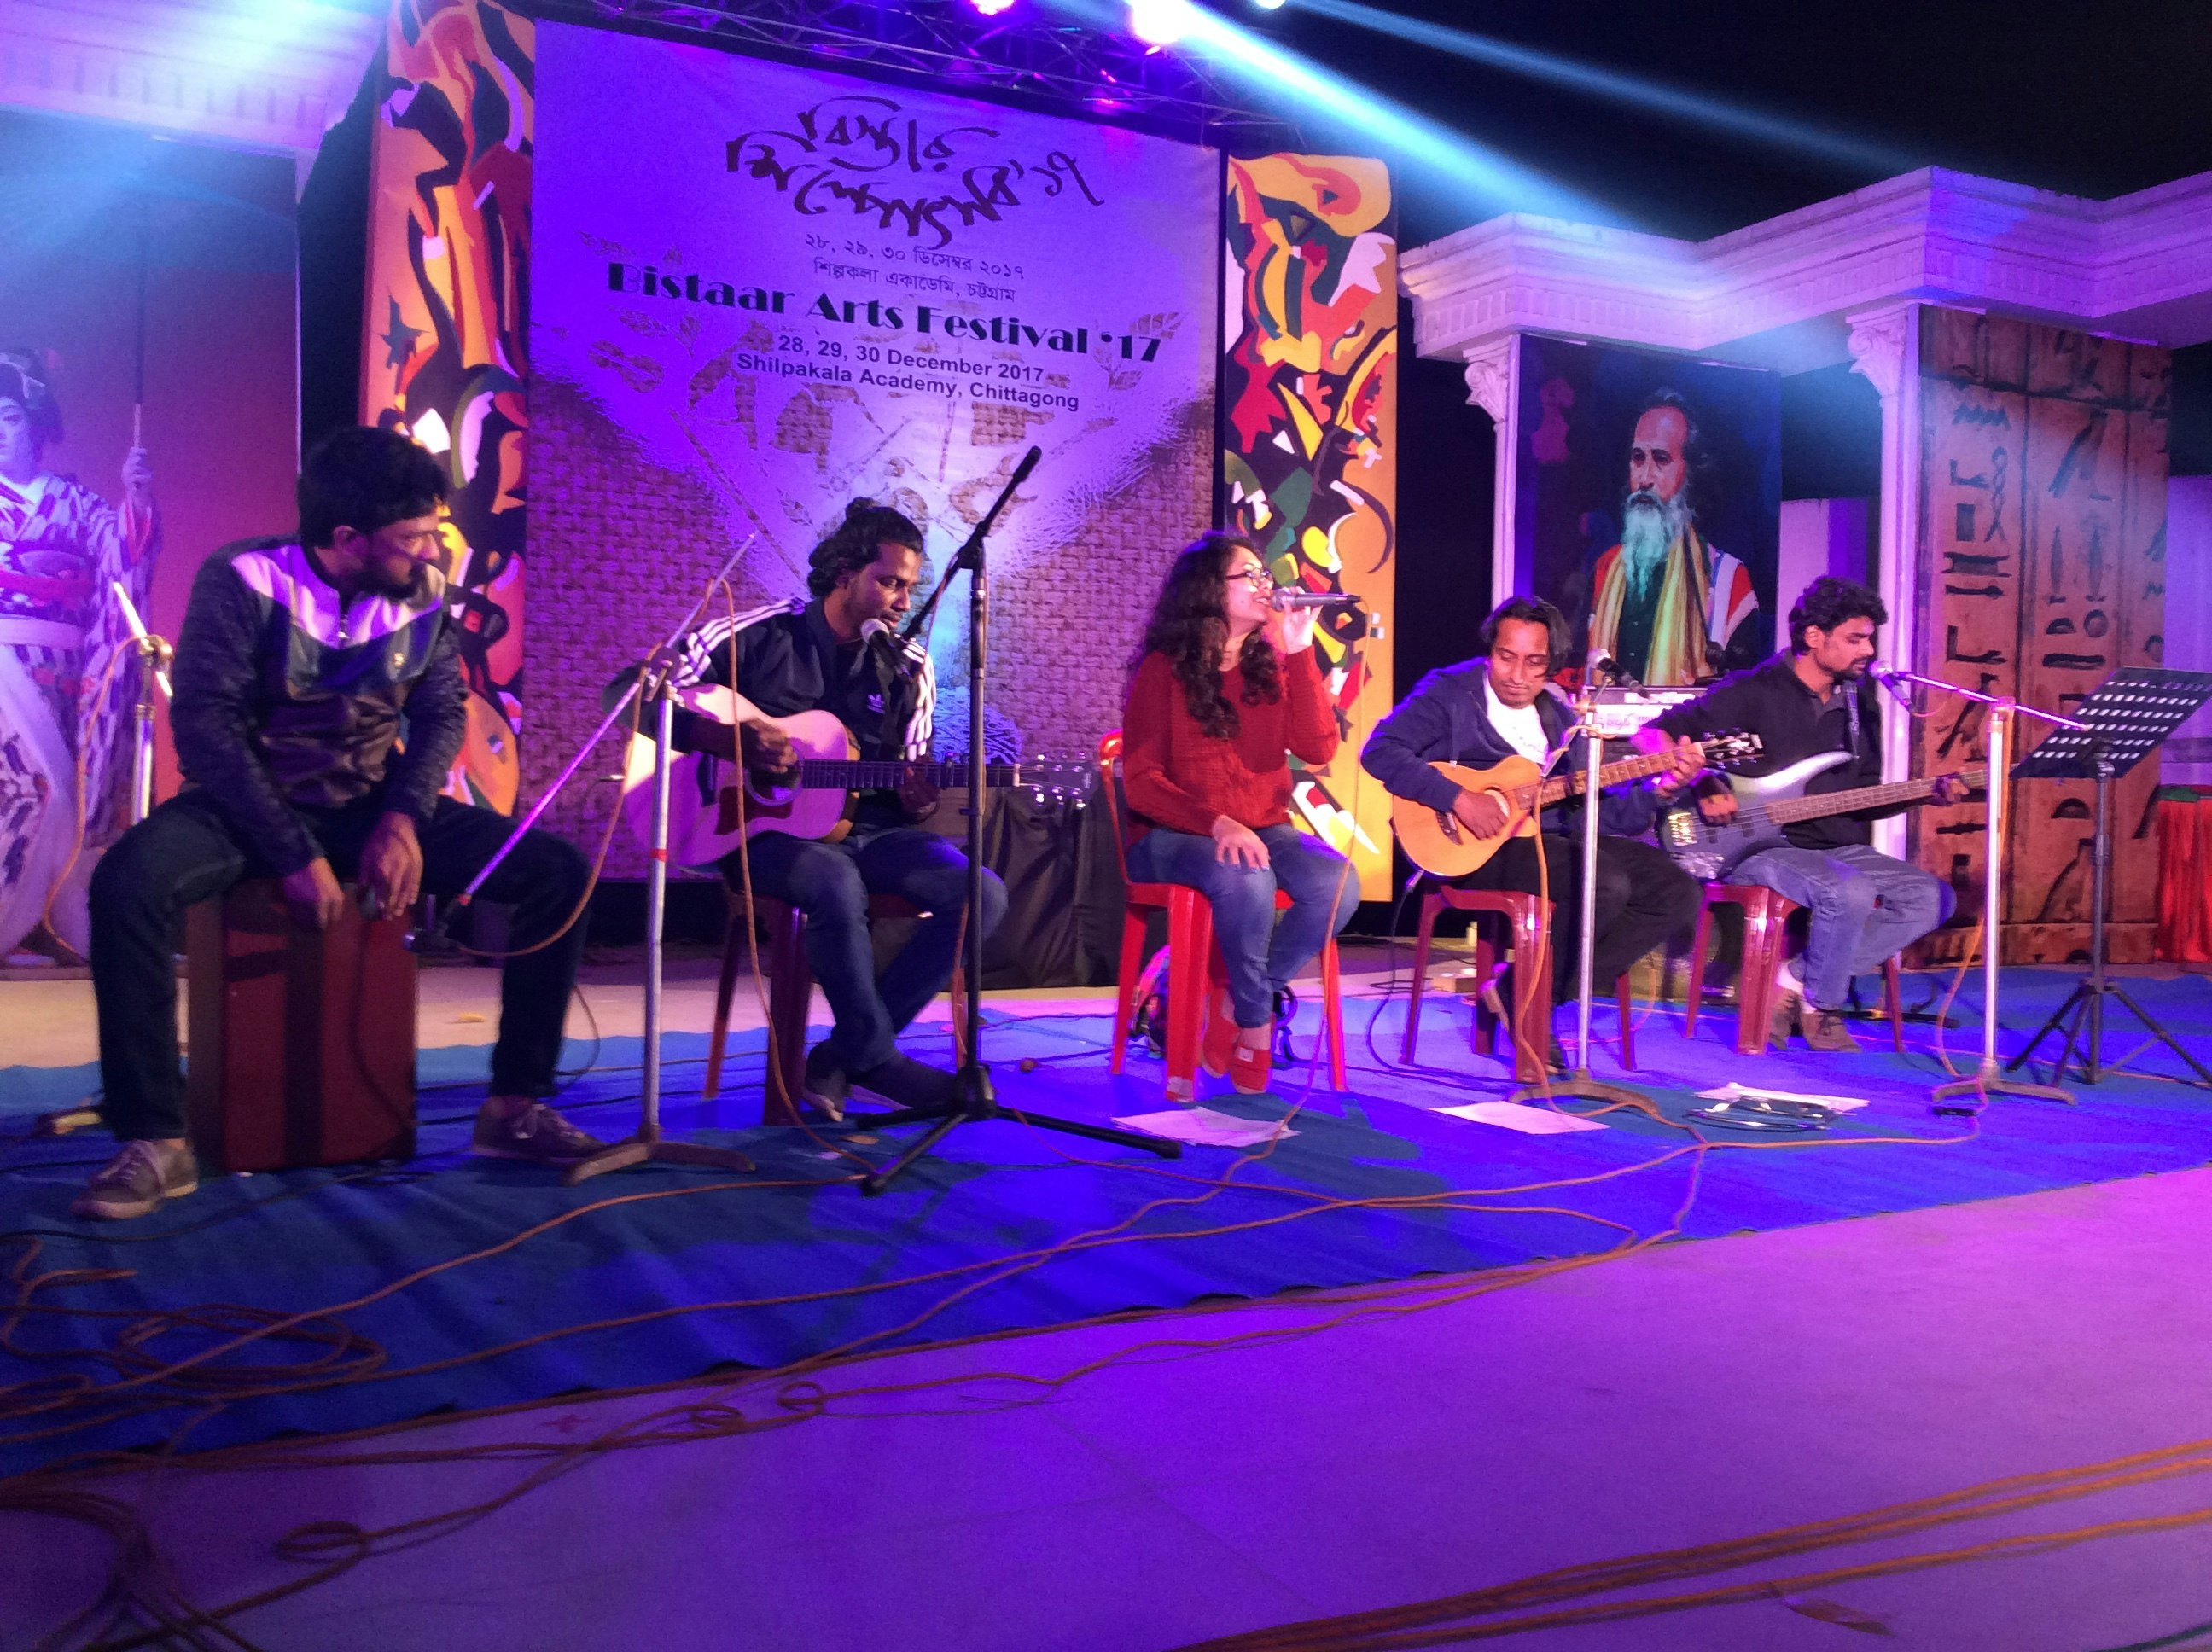 Five seated musicians performing on a stage lit with purple light. One of them is drumming on his stool, three are playing guitars and one is singing into a microphone.